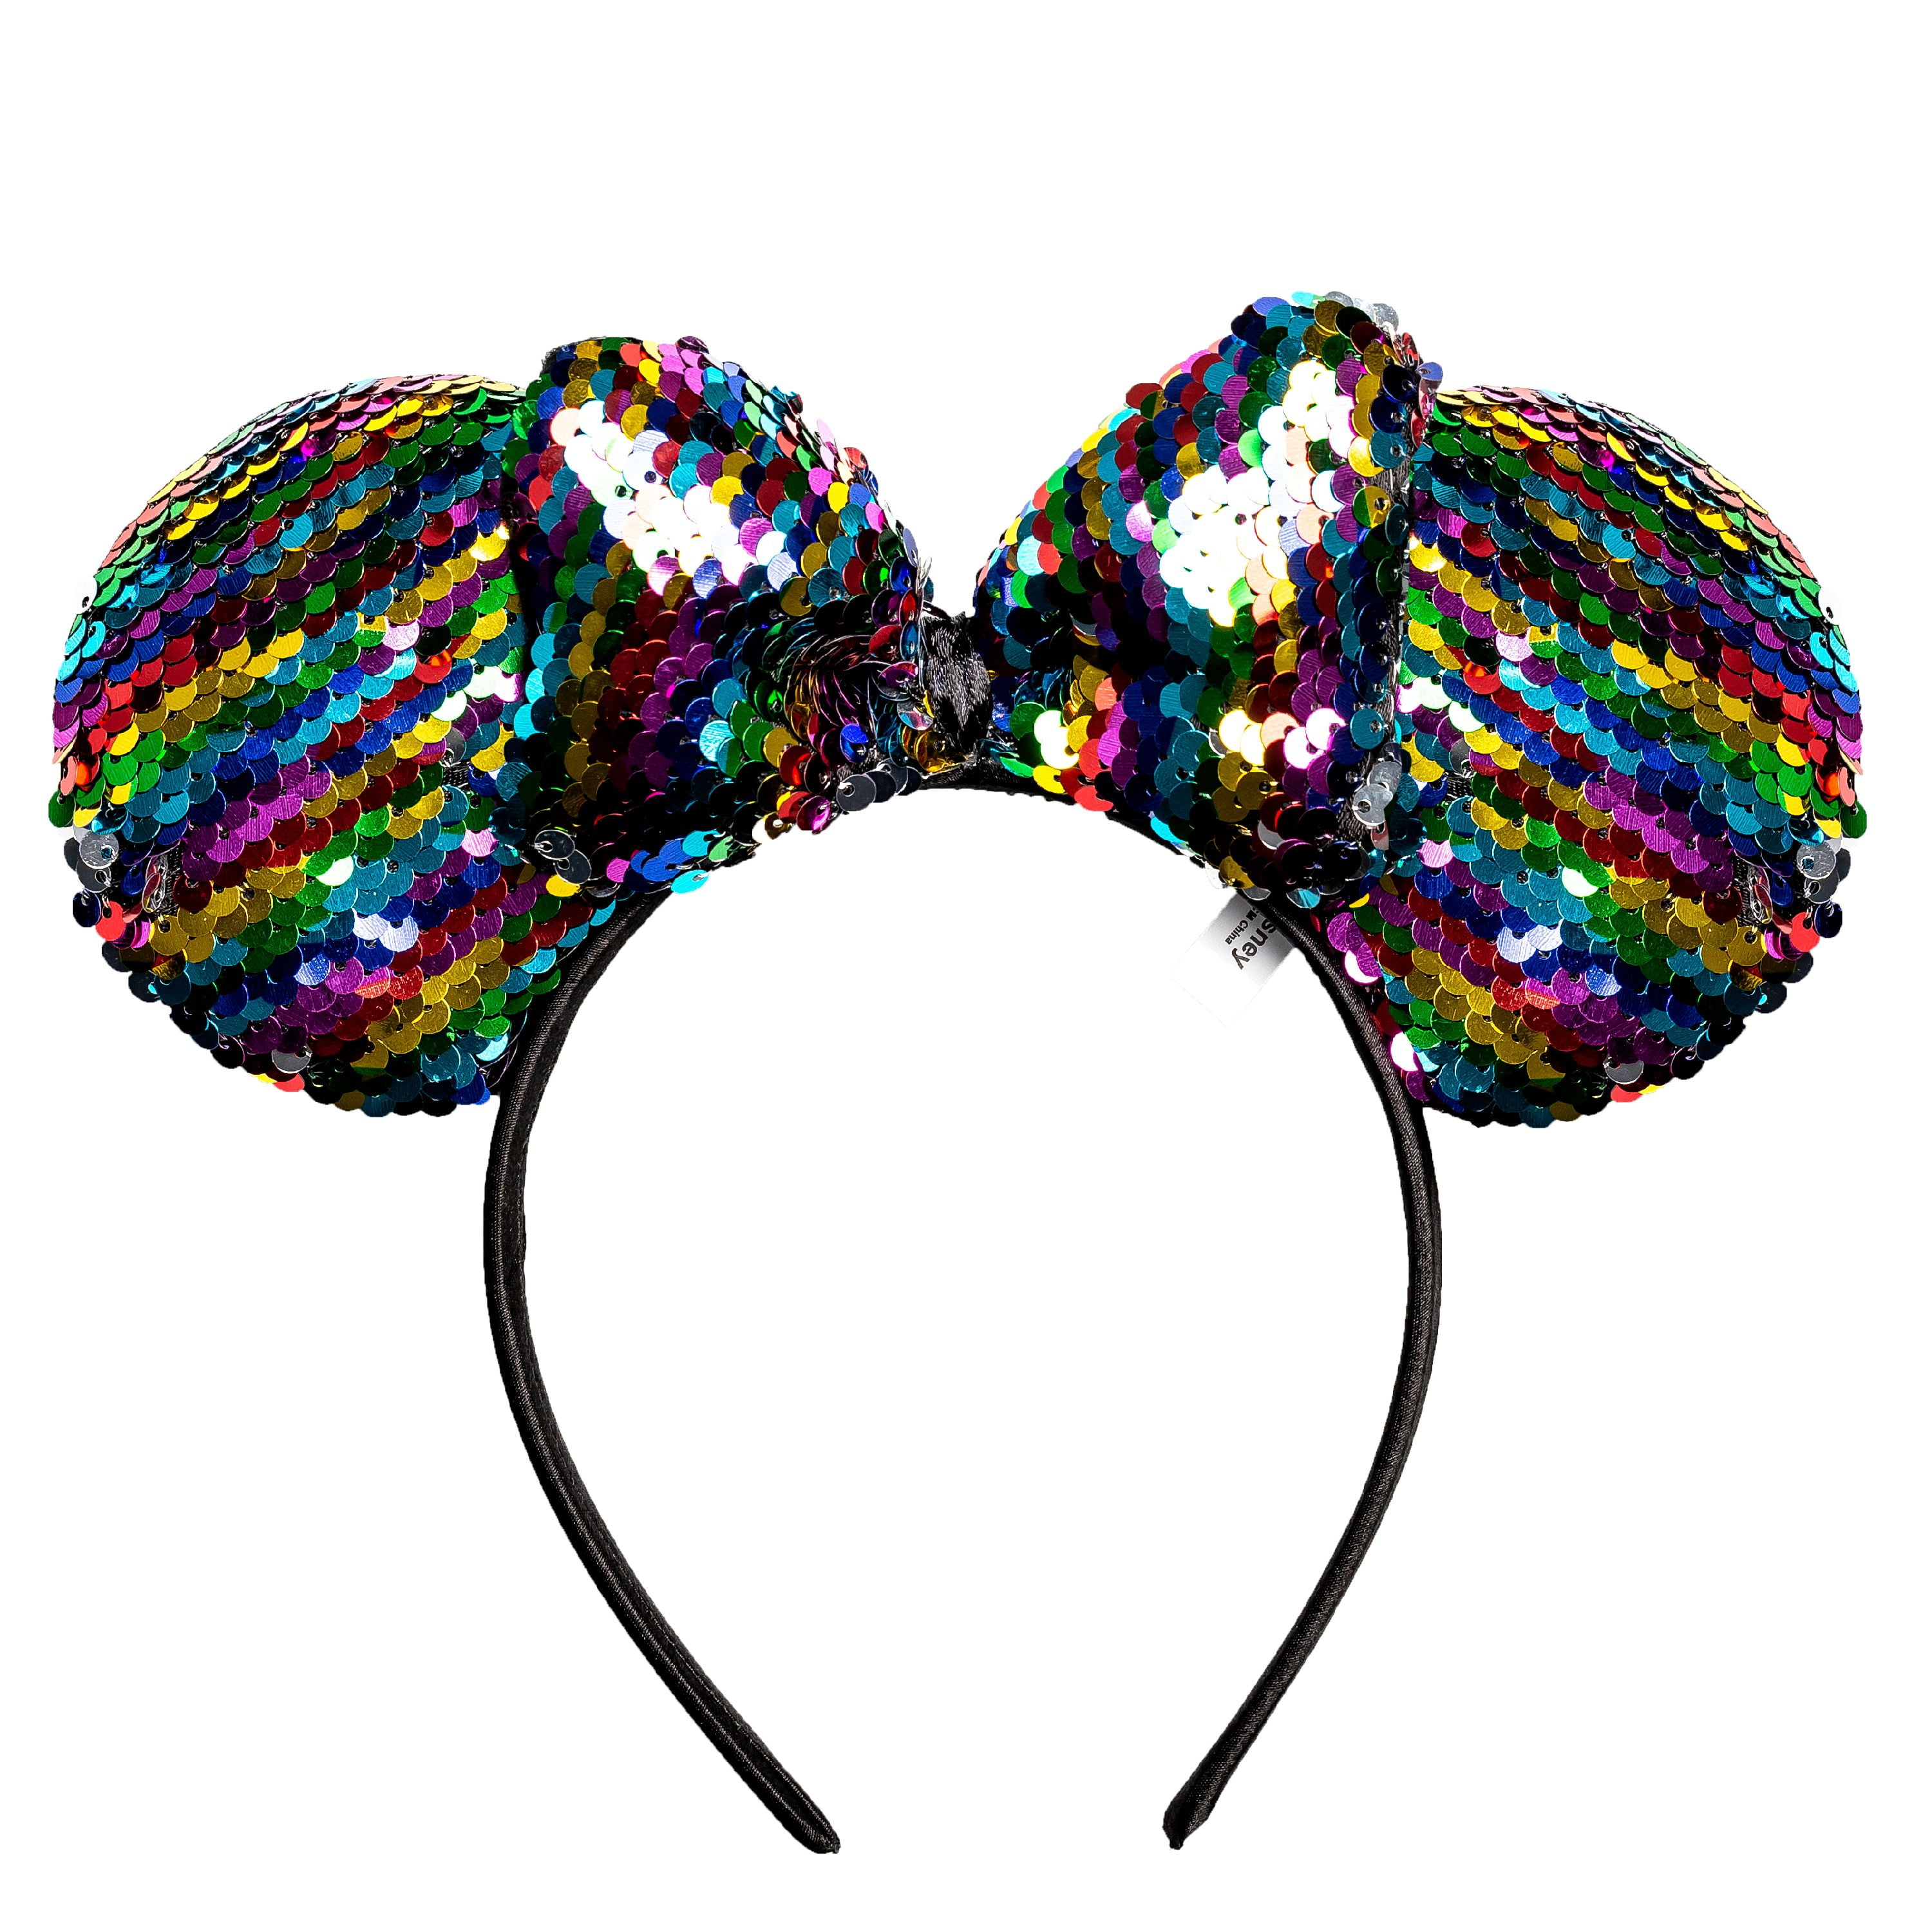 Minnie Mouse Ears Headband Shiny Black Sparkly Gold Bow Birthday Fit Adult Kids 